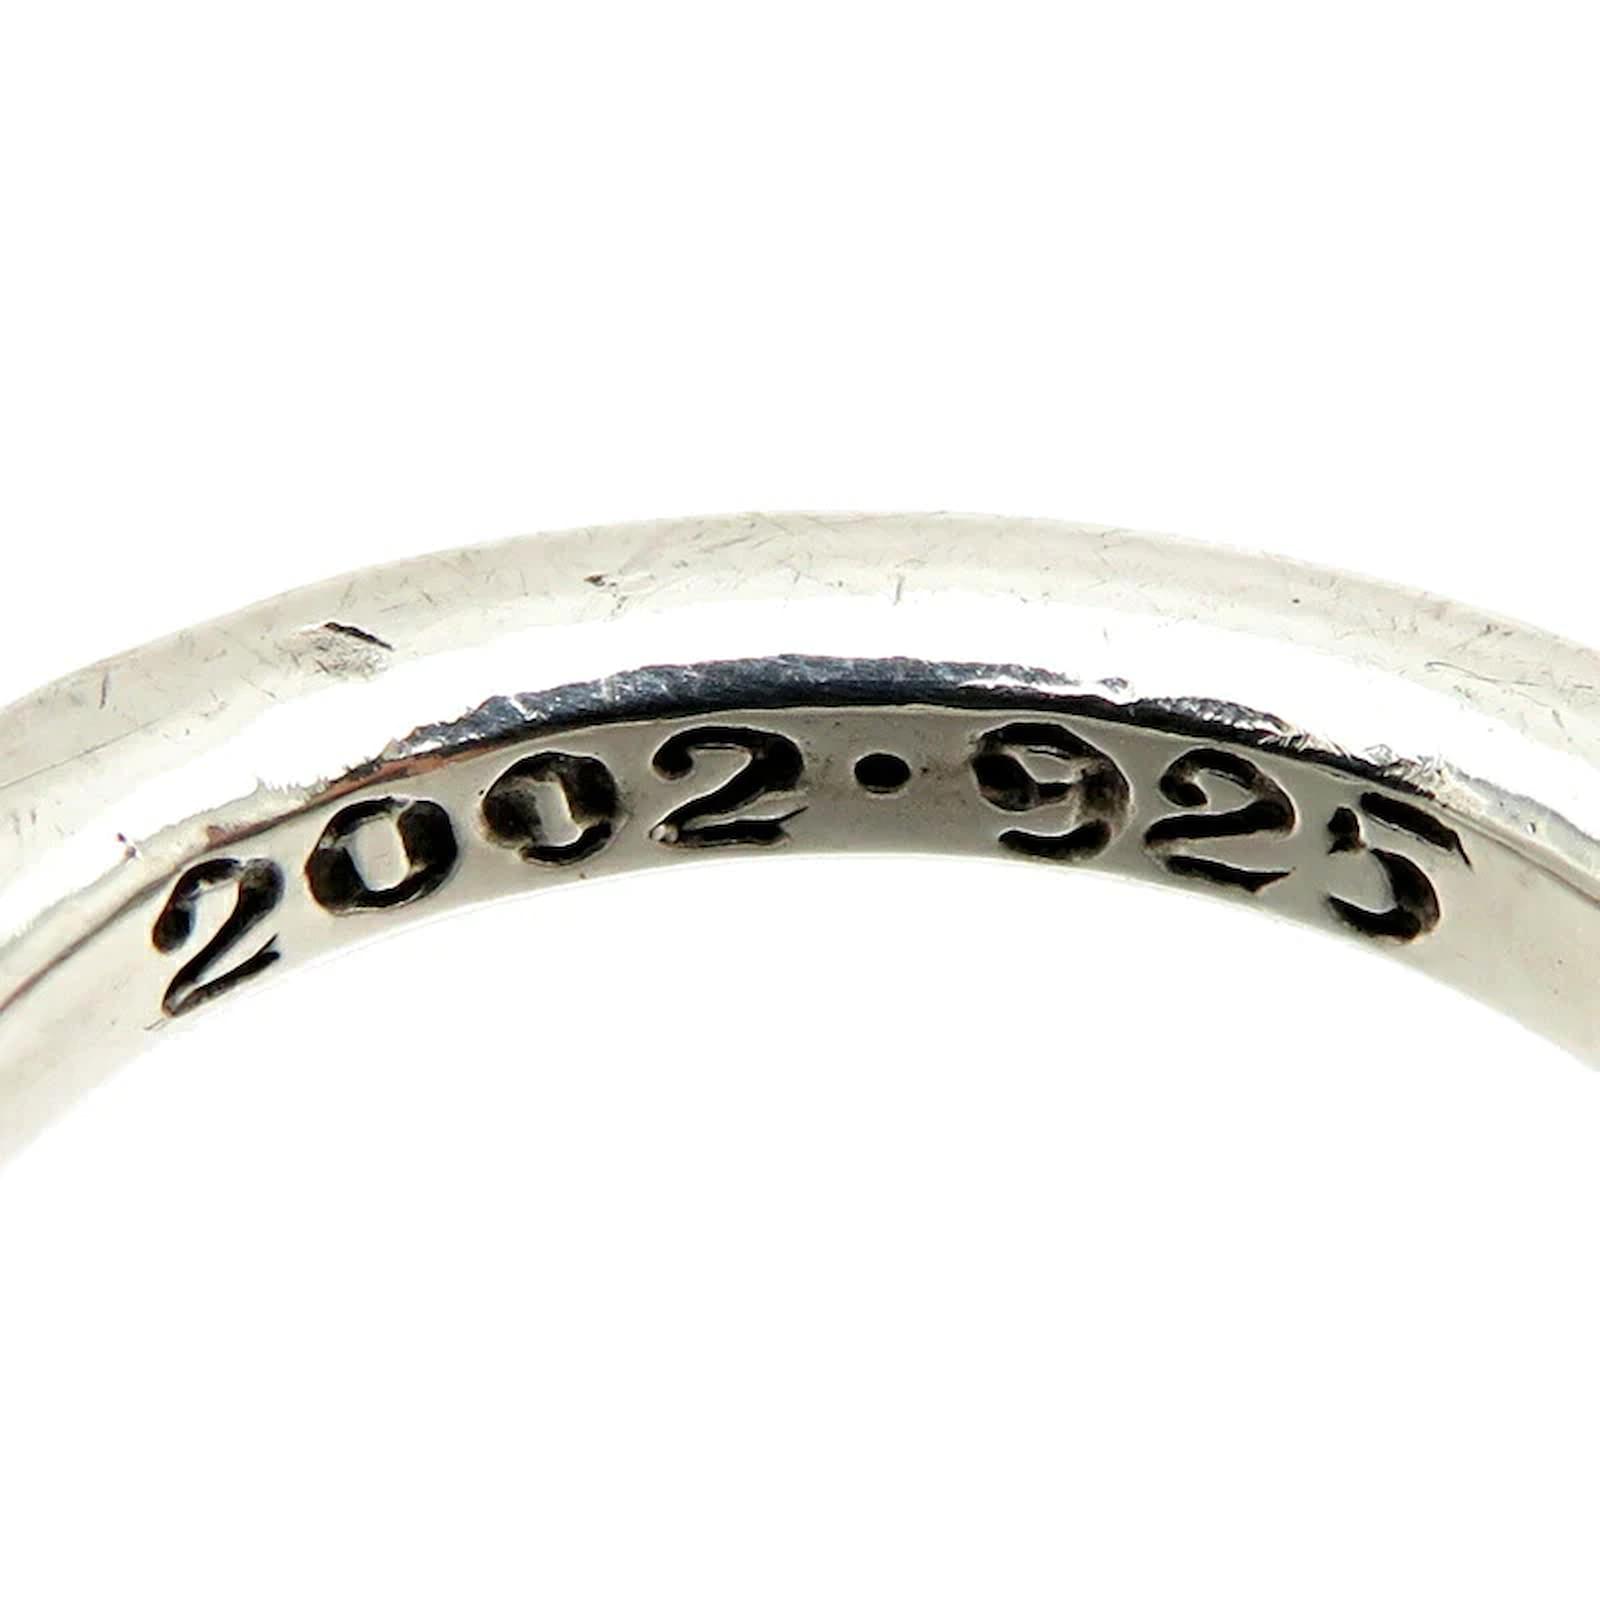 38.9mm stainless steel spacer ring fit 6497,6498, st36 corgeut 43mm watch  case | eBay